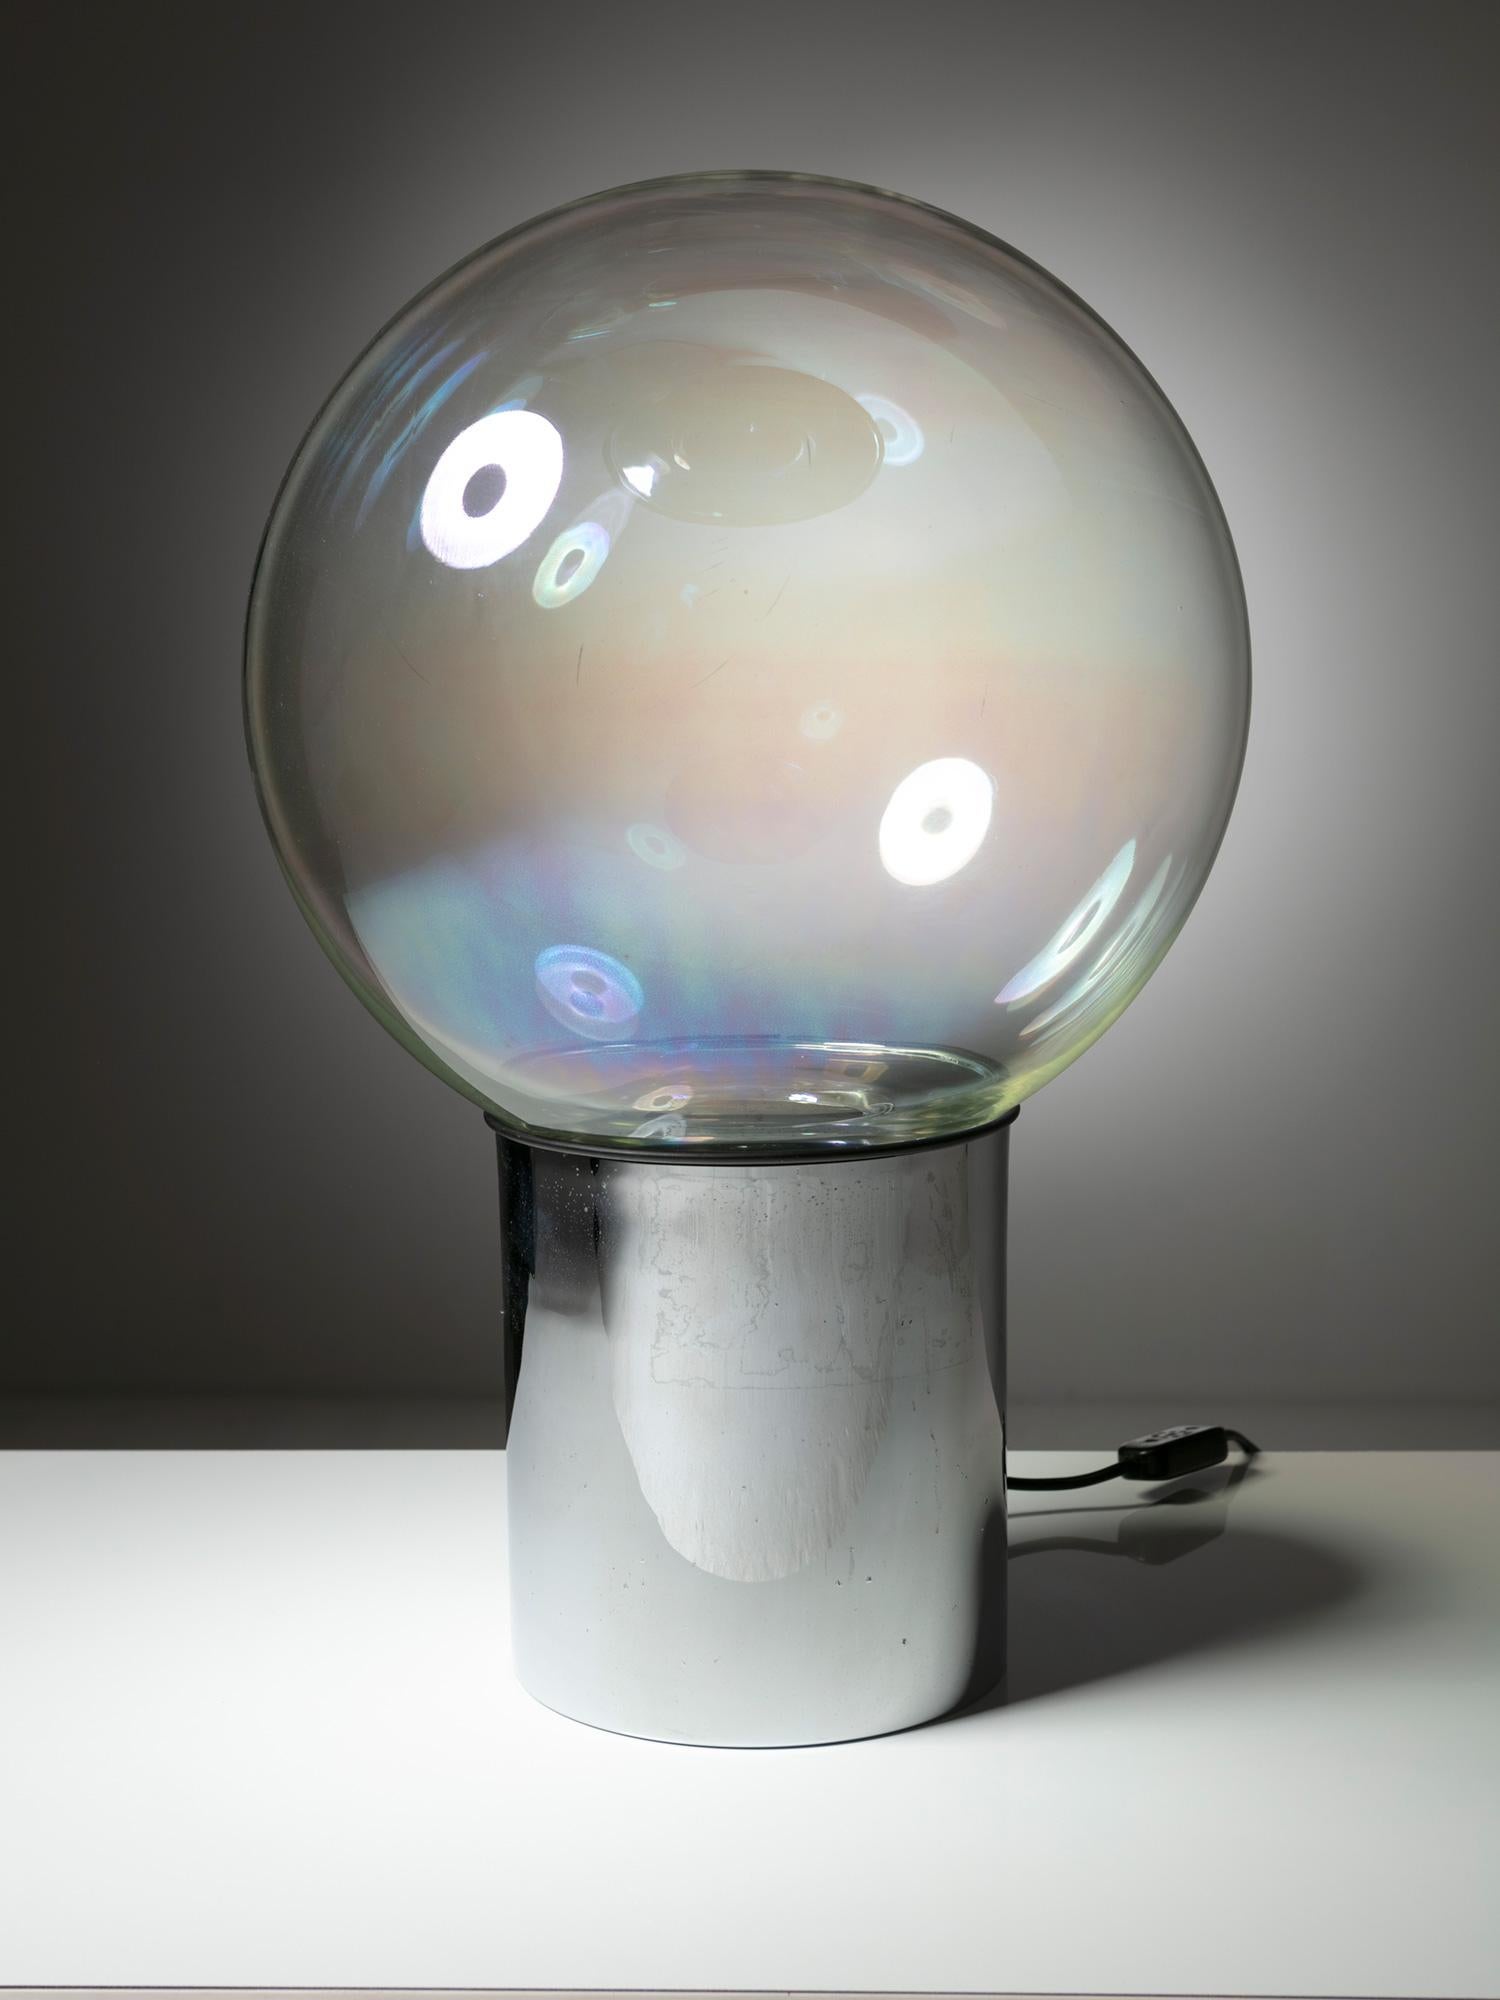 Large iridized glass sphere supported by chrome base.